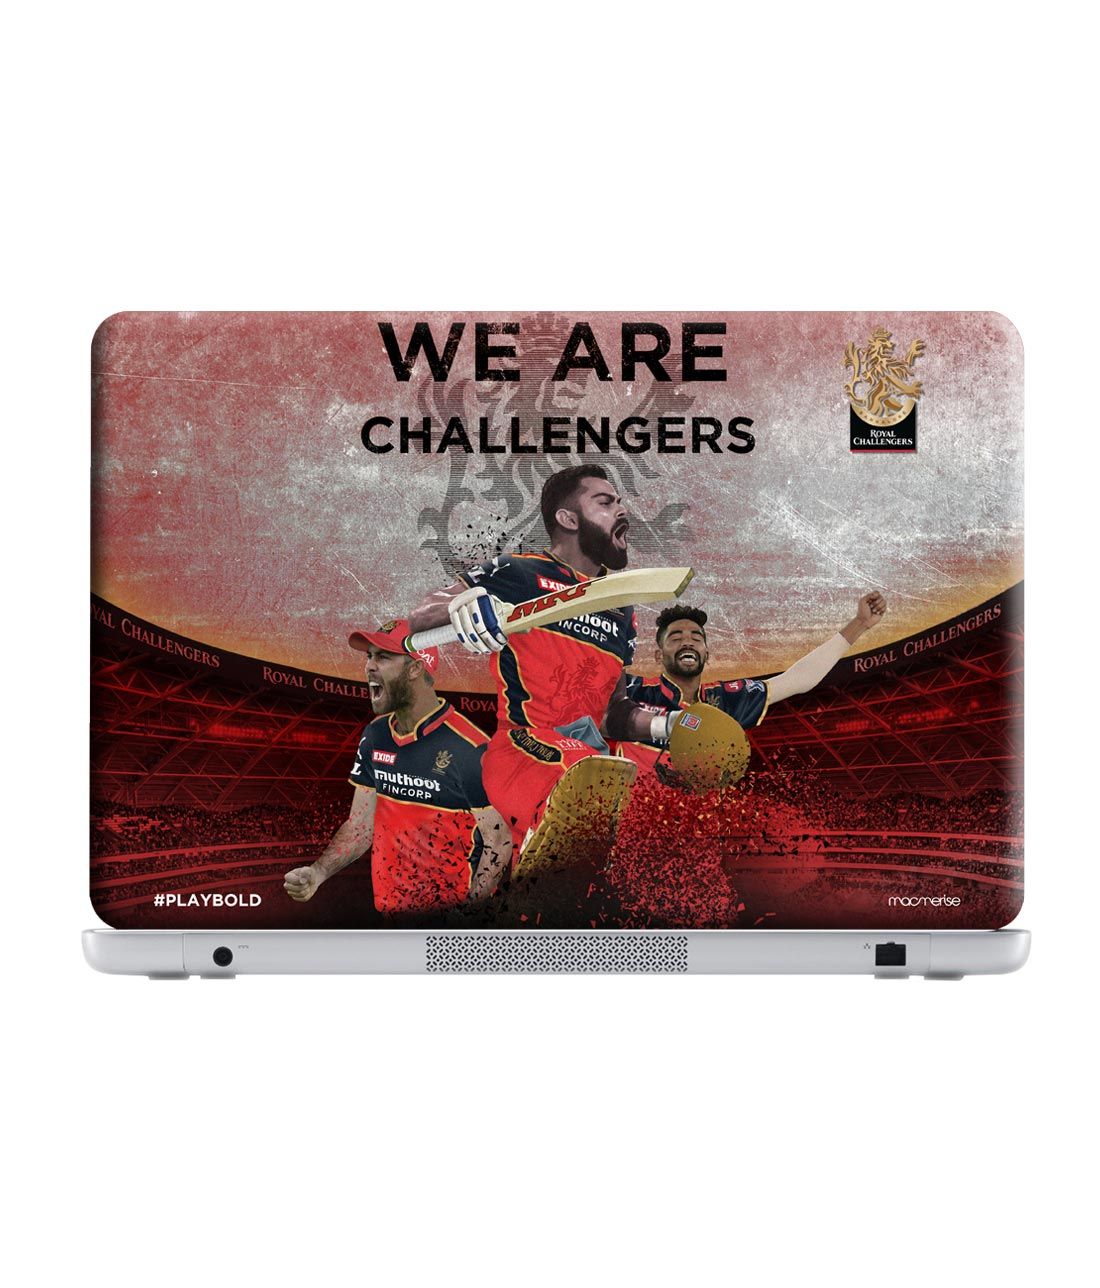 

Redwolf - RCB Go Getters - Royal Challengers Bangalore Official Laptop Skin-macbook-air-13"-(2012-2017), Black